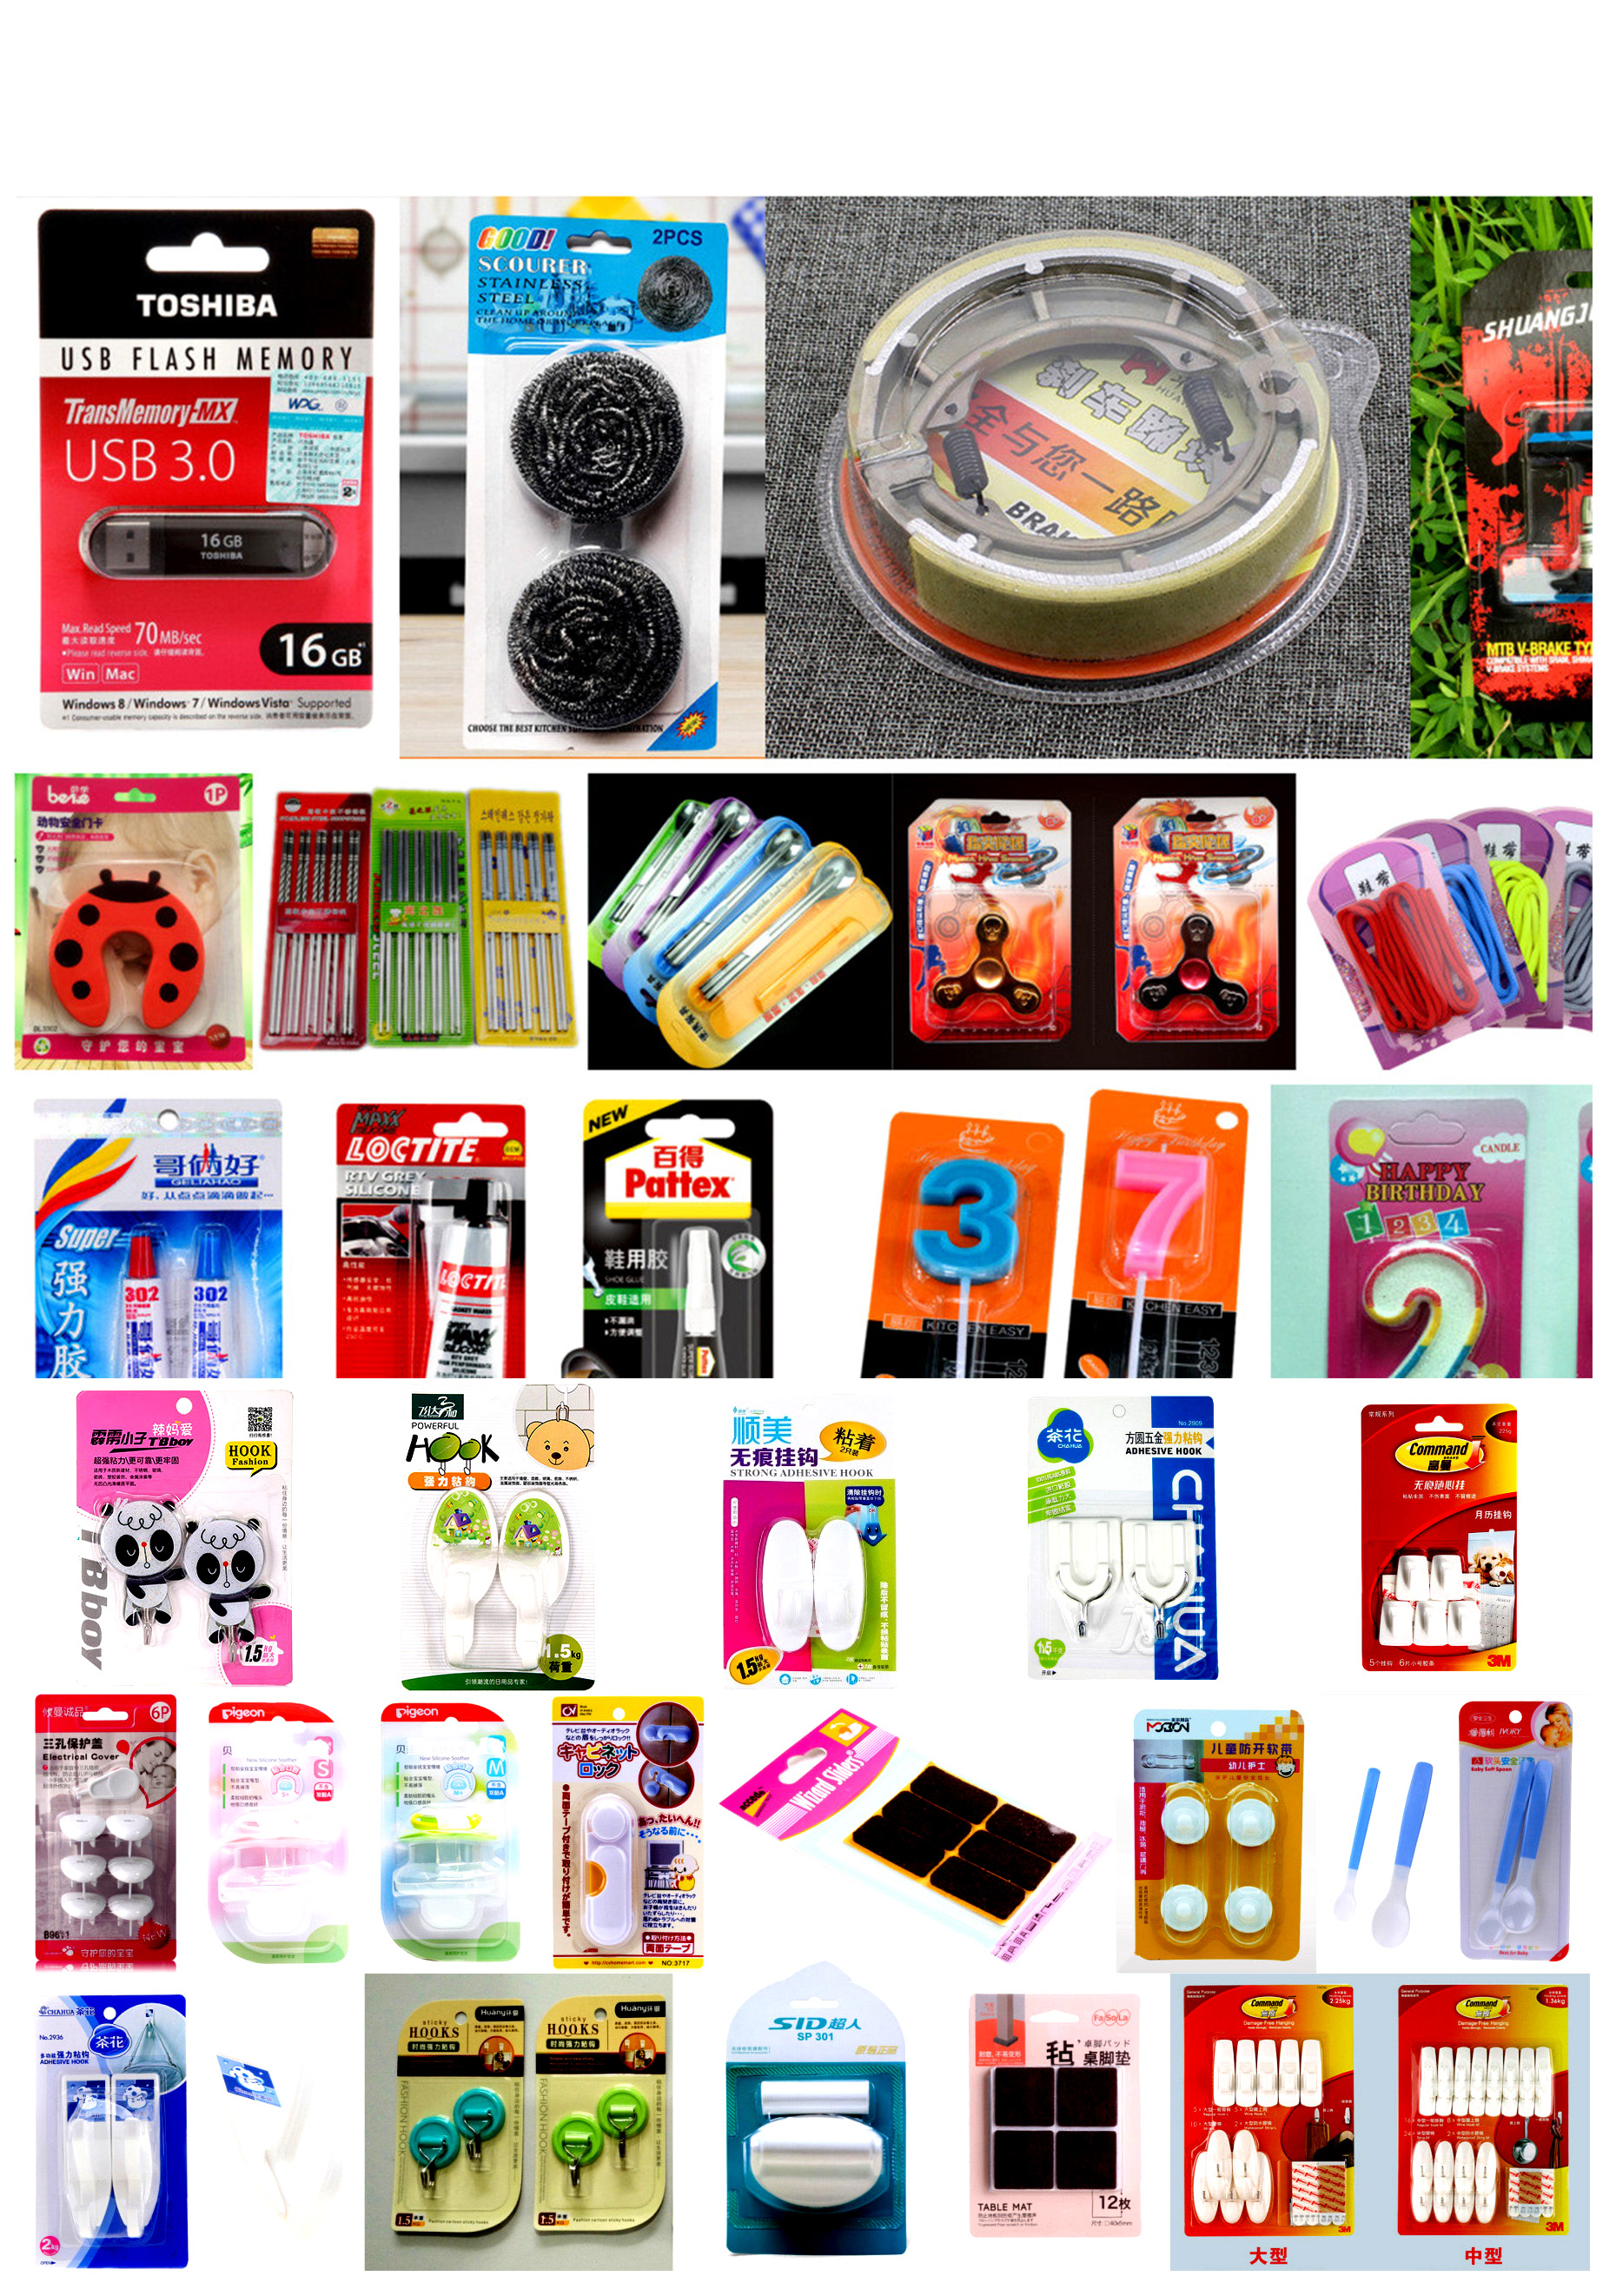 Blister packing products